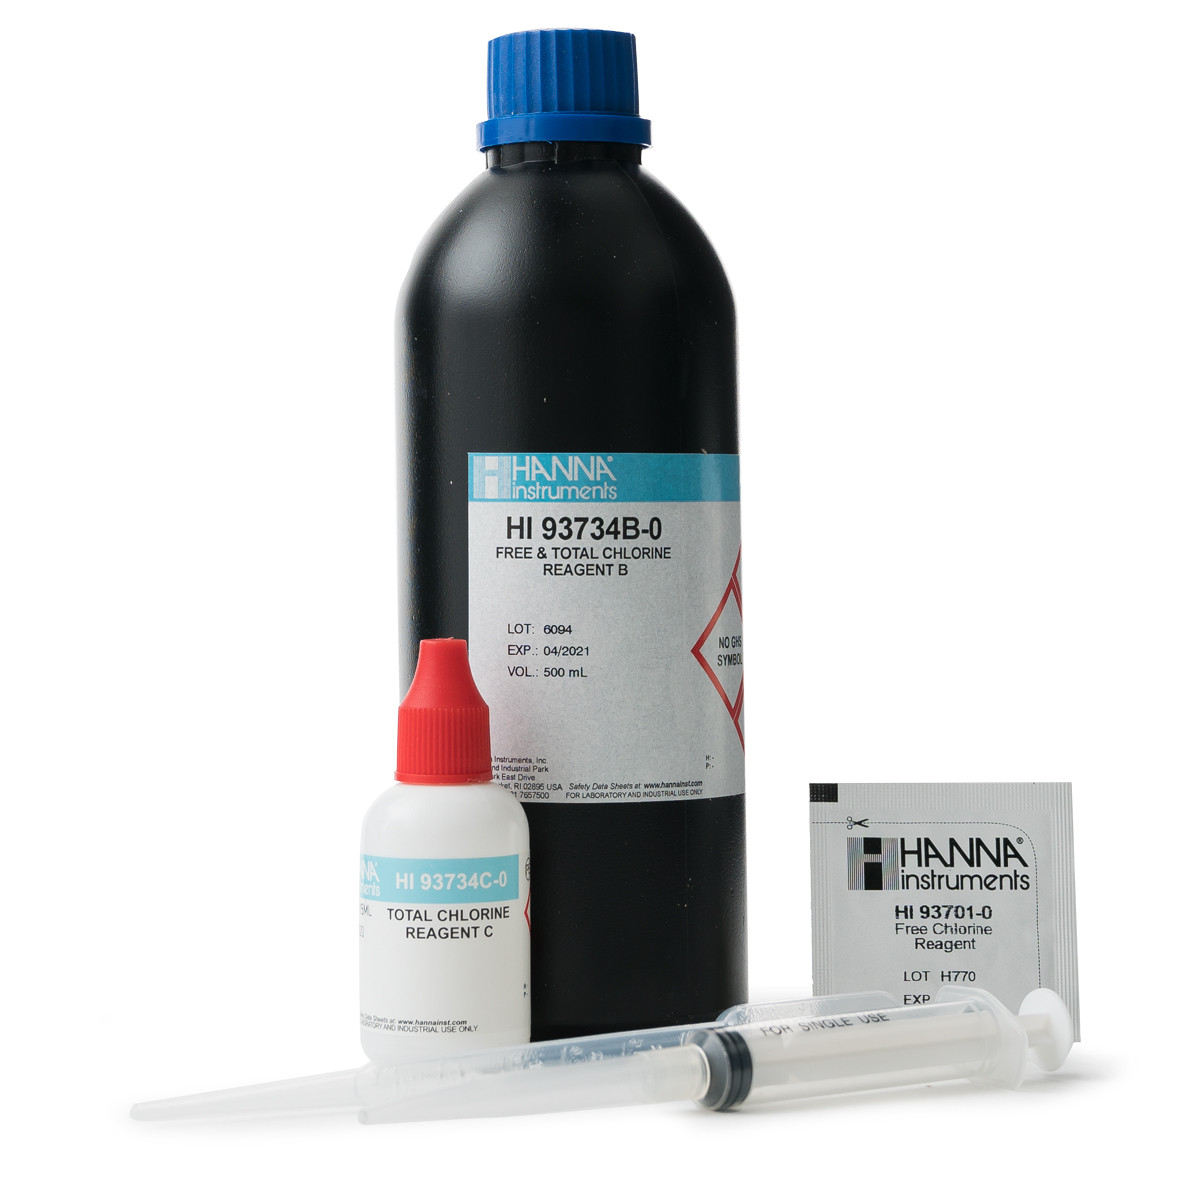 Free and Total Chlorine High Range Reagents (300 tests)